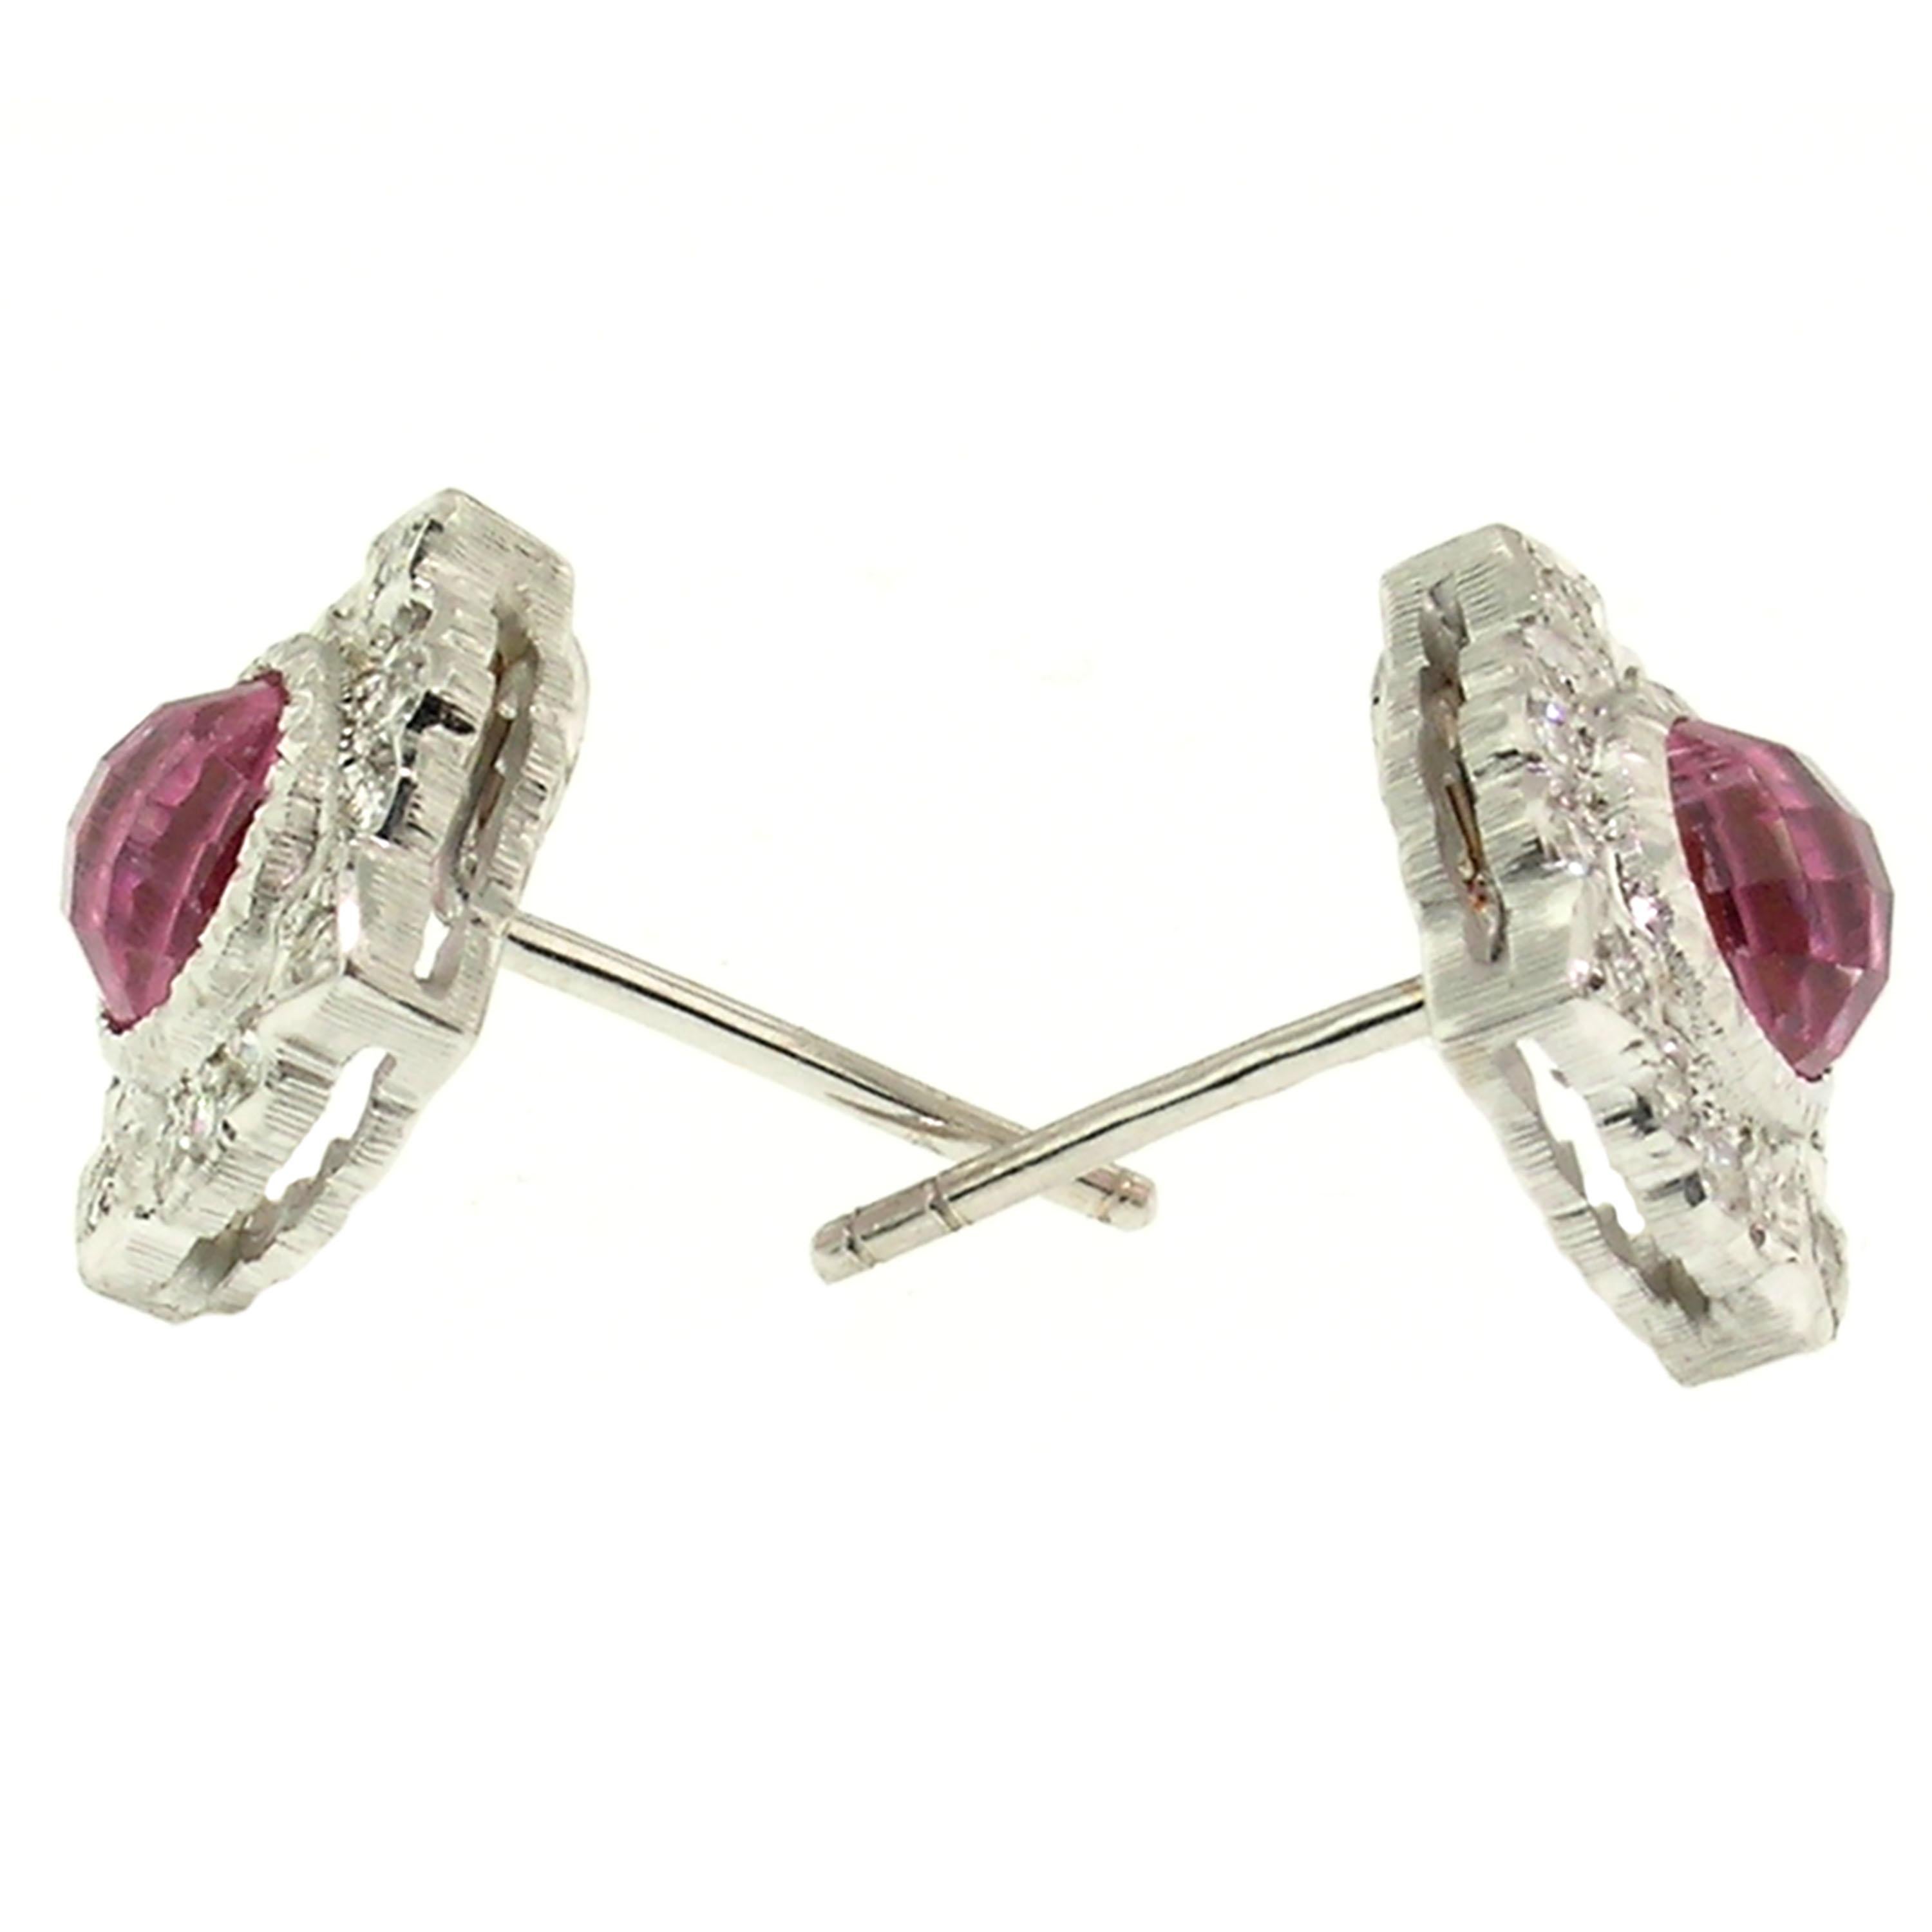 Contemporary Maine Tourmaline and Diamond 18kt Earrings, Made in Italy For Sale